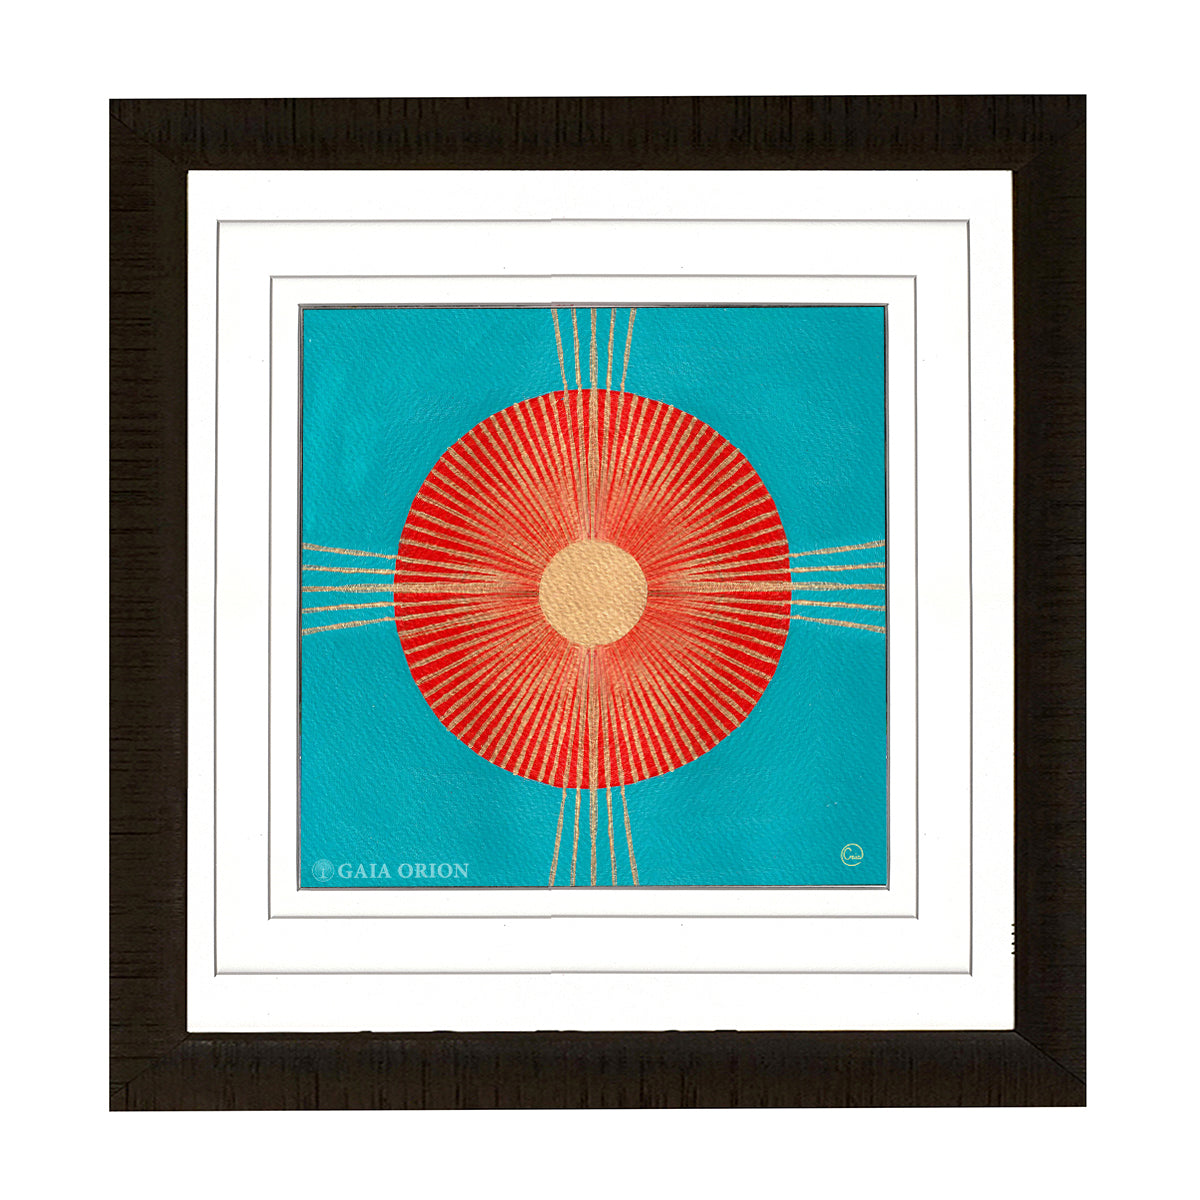 It is vibrant gold sun against a orange circle and a turquoise background a symbol for truth power and life